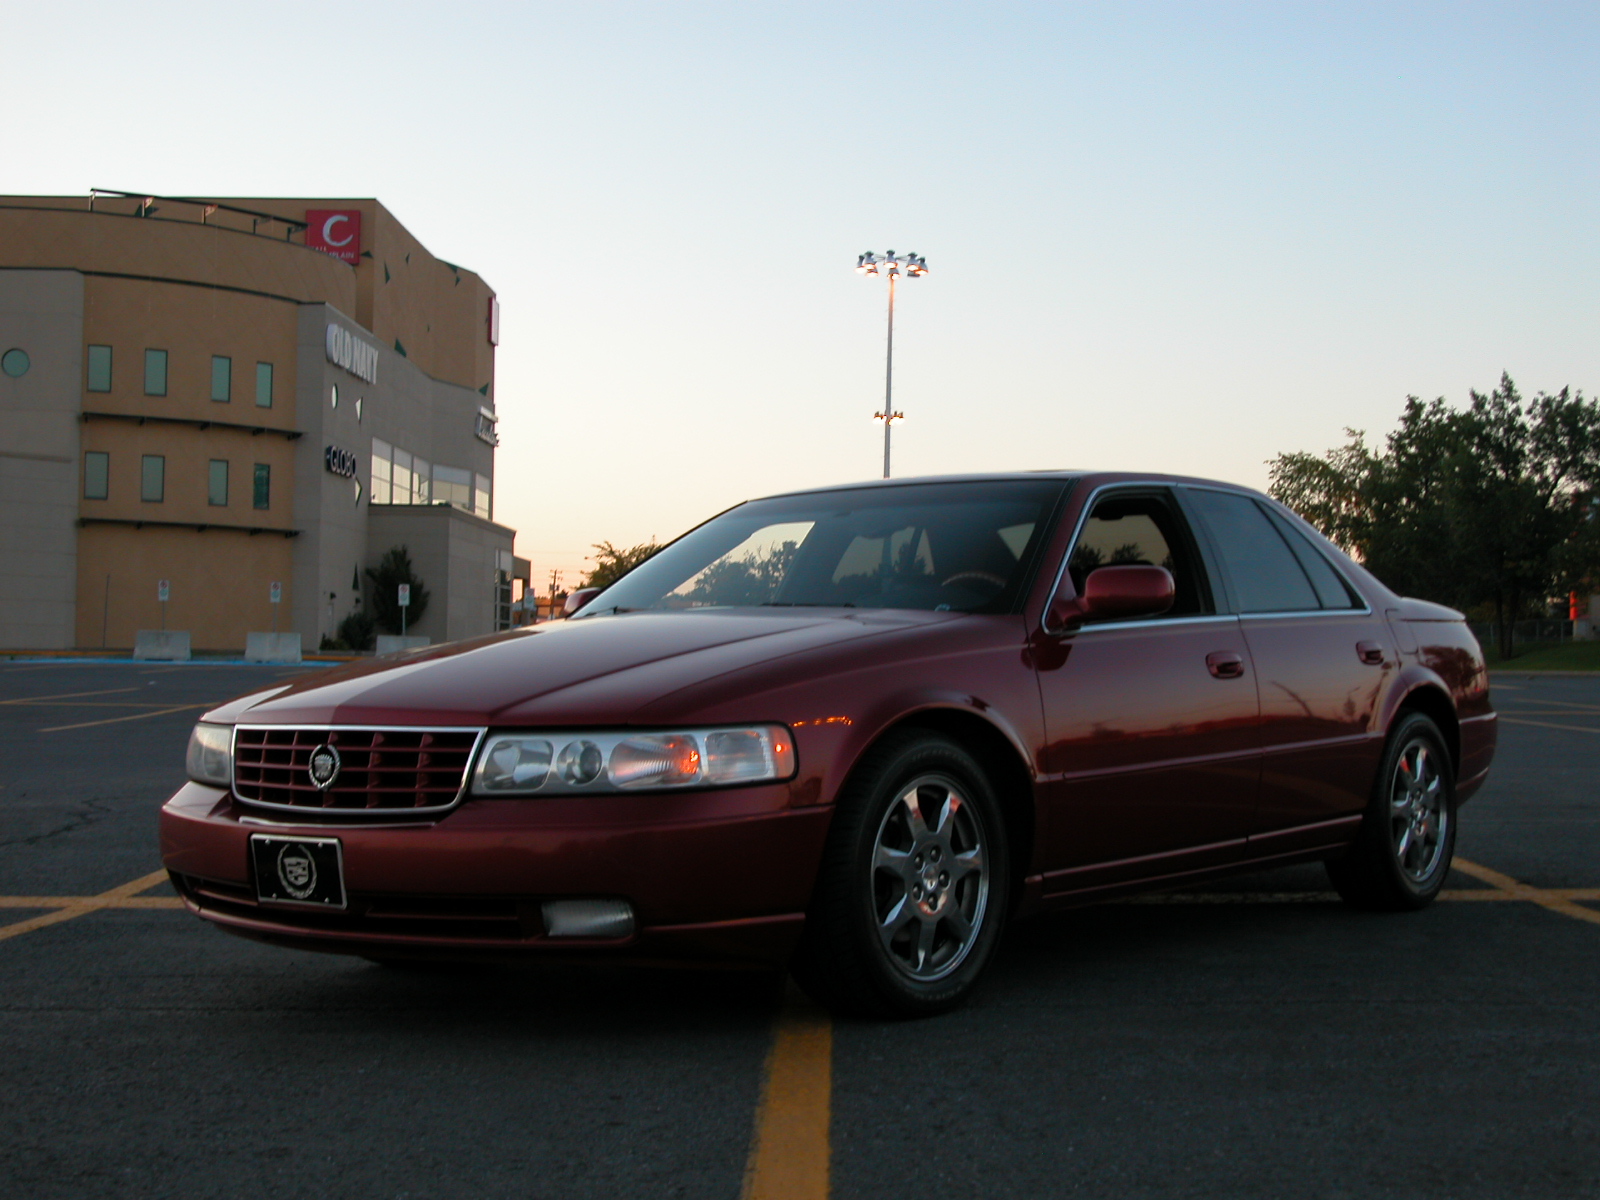 2002 cadillac seville sts. 2002 Cadillac Seville. More images